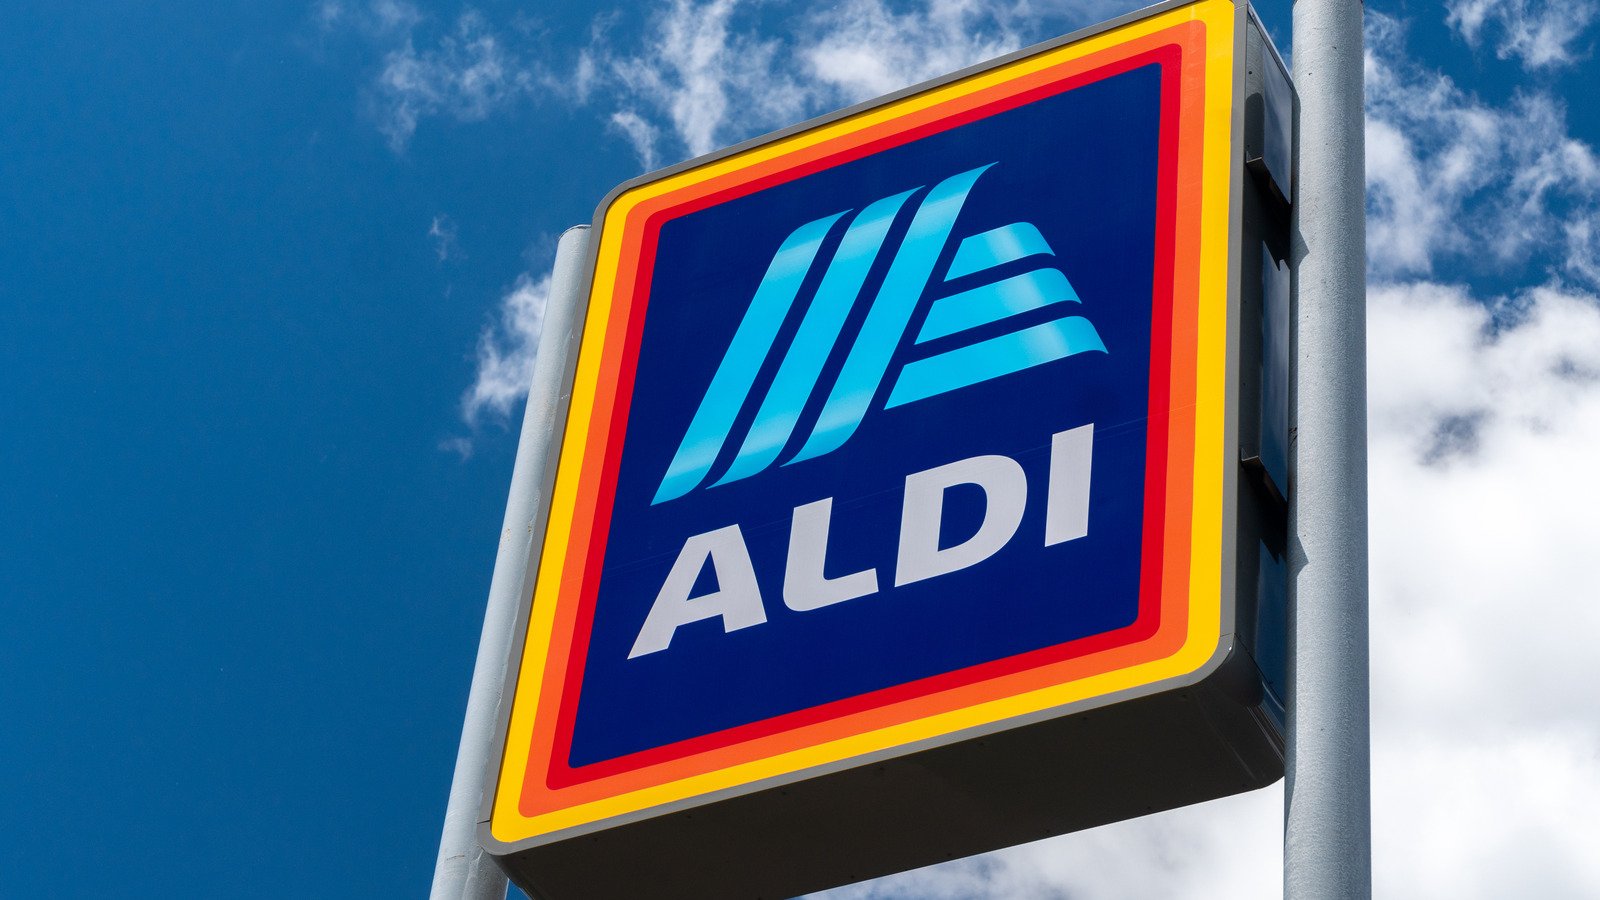 False Things You Believe About Shopping At Aldi